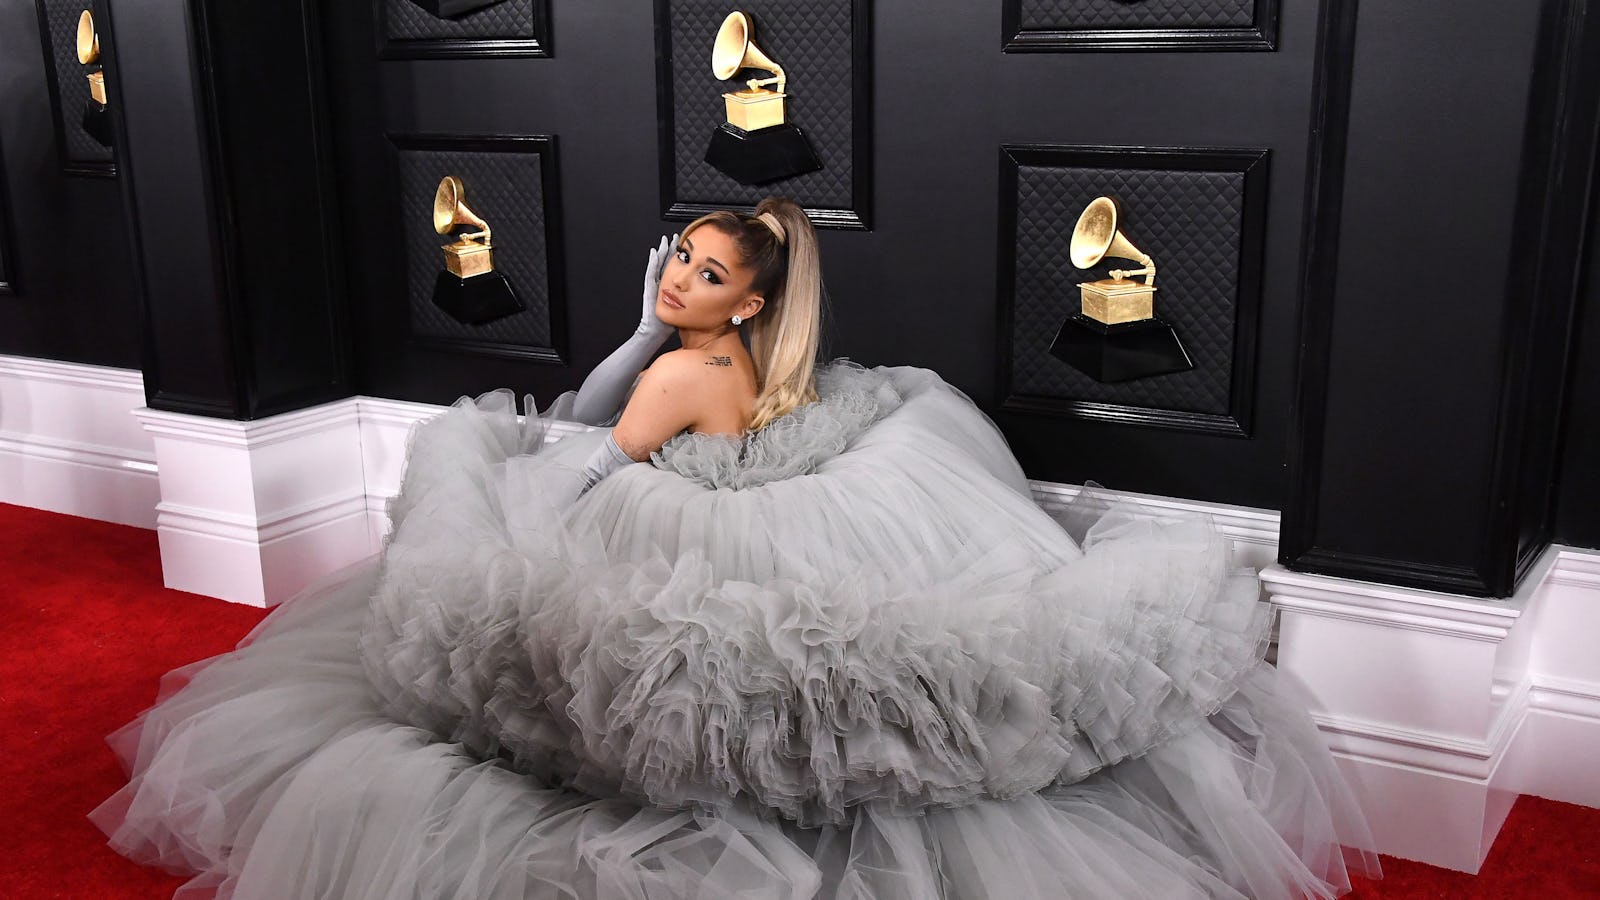 19 Iconic Grammys Outfits To Reminisce Over